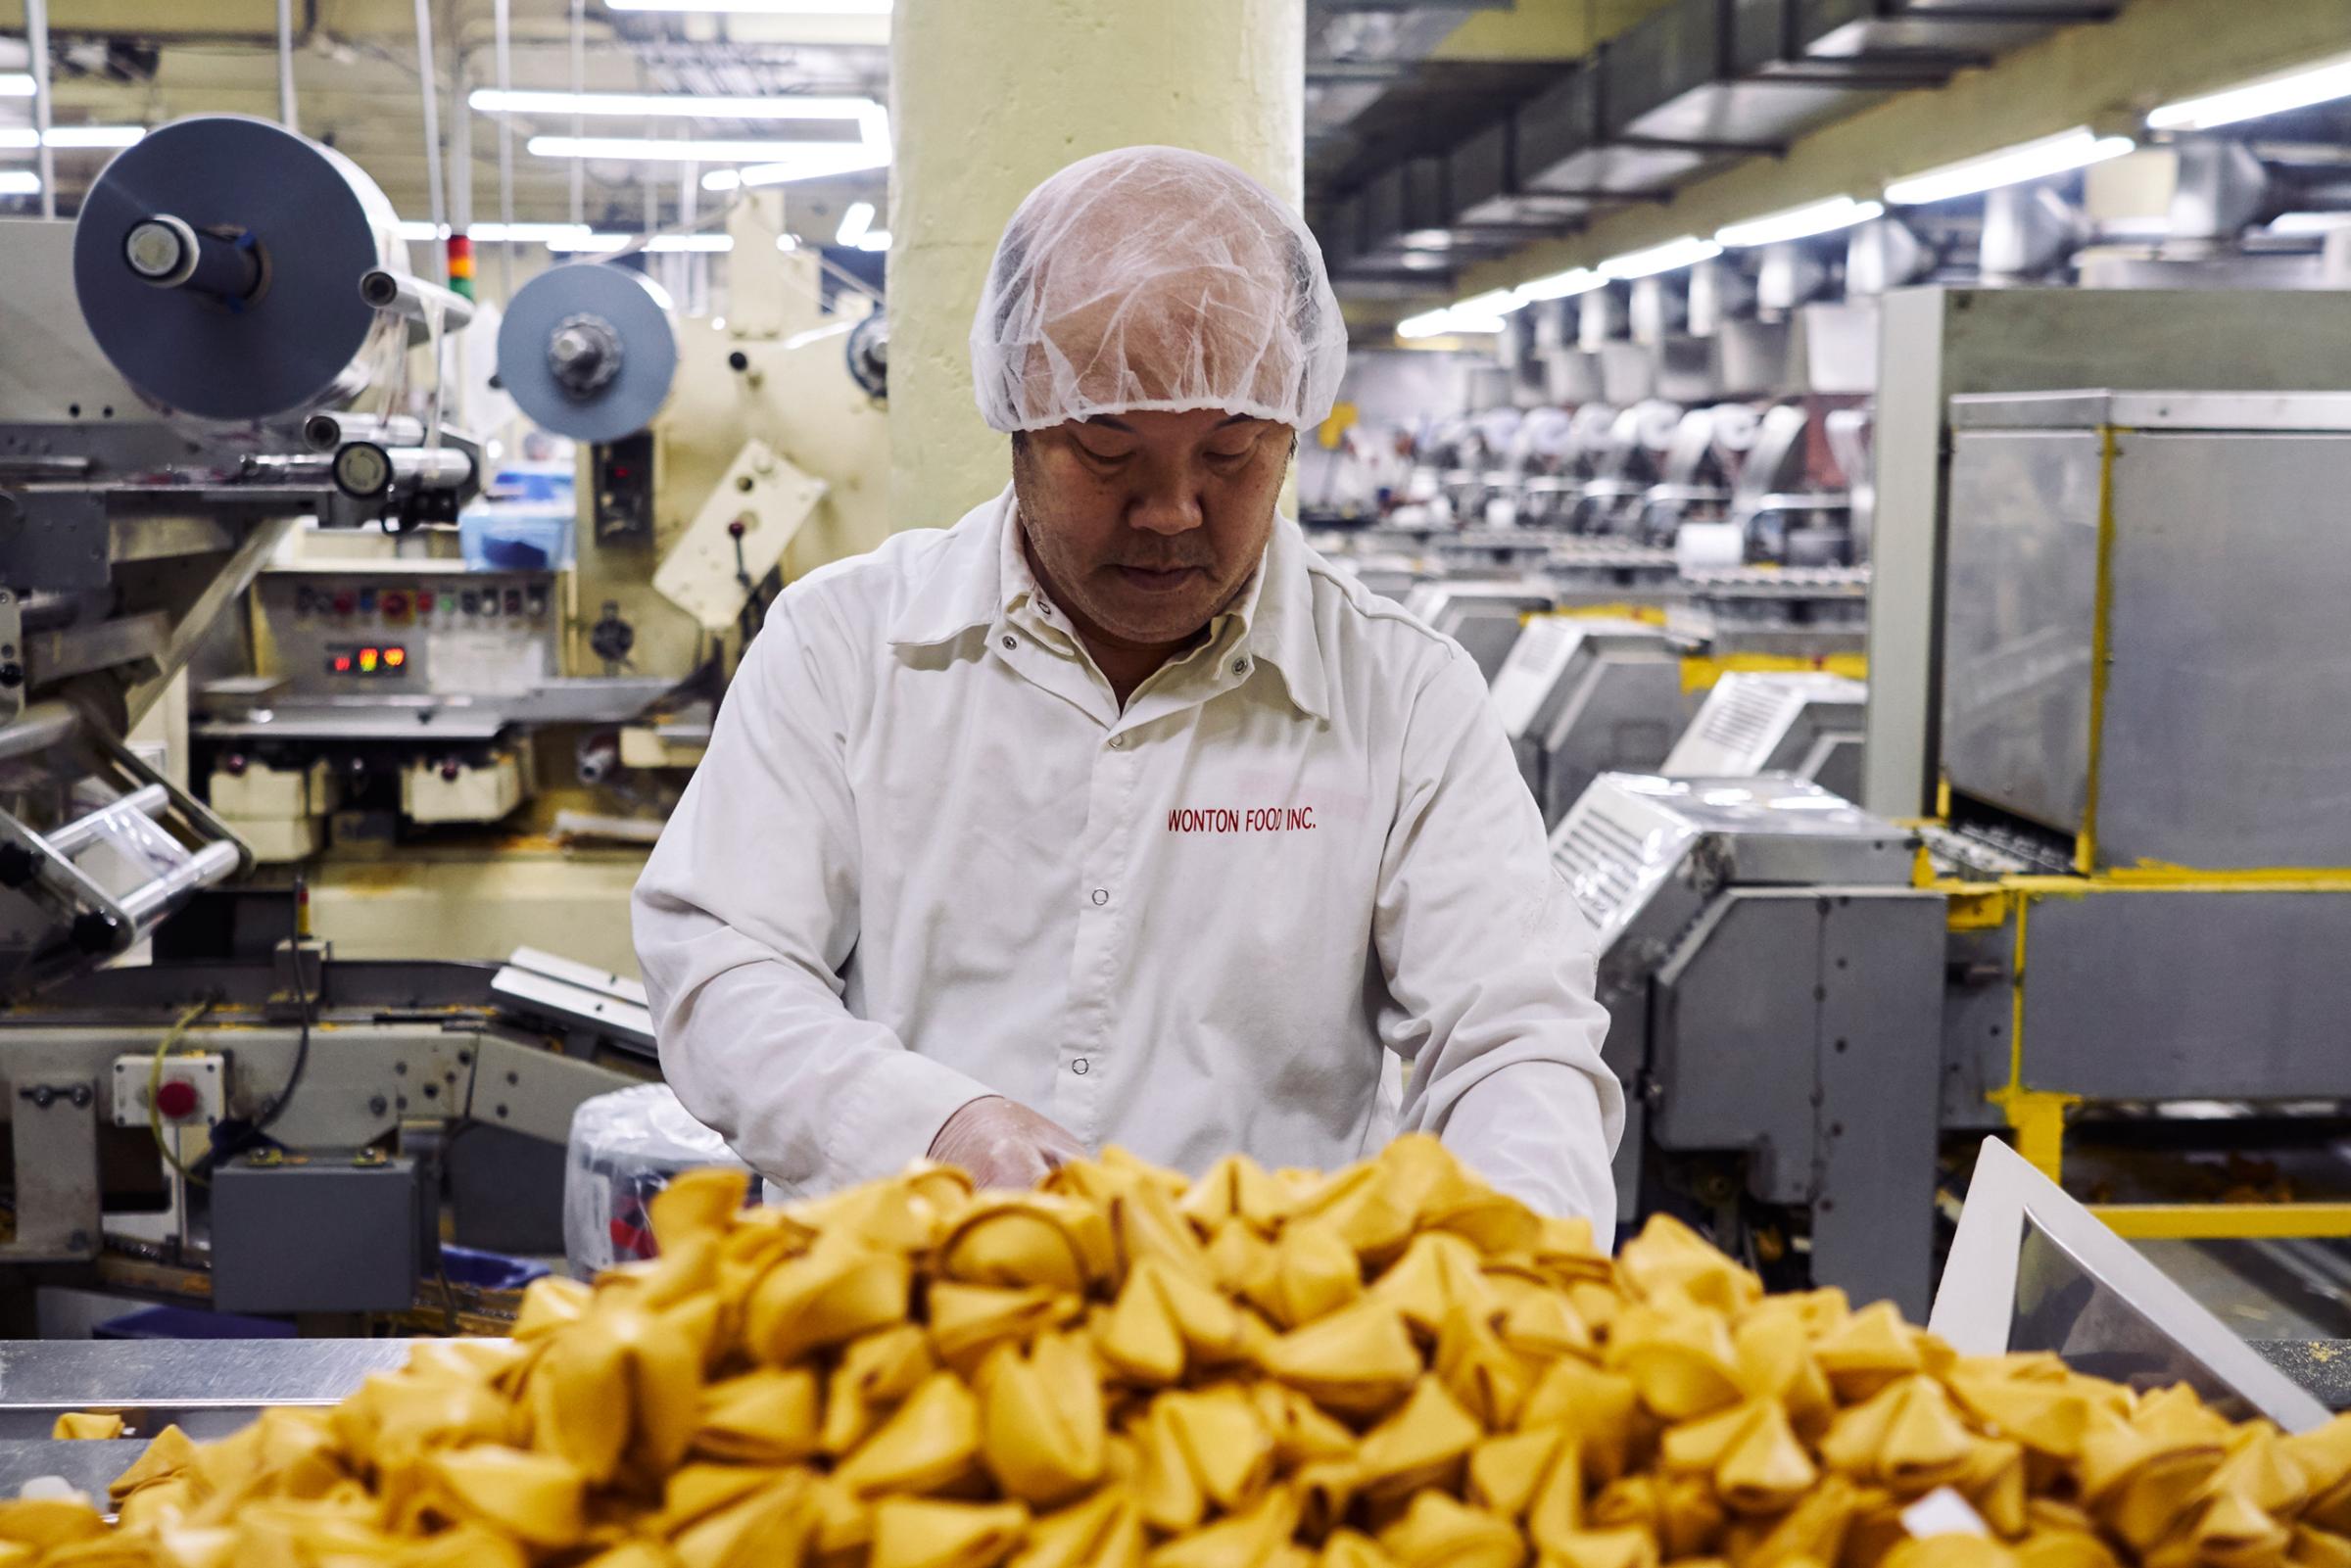 Inside the fortune cookie manufacturing plant of Wonton Food Inc. Brooklyn, New York.Jan. 18, 2017.